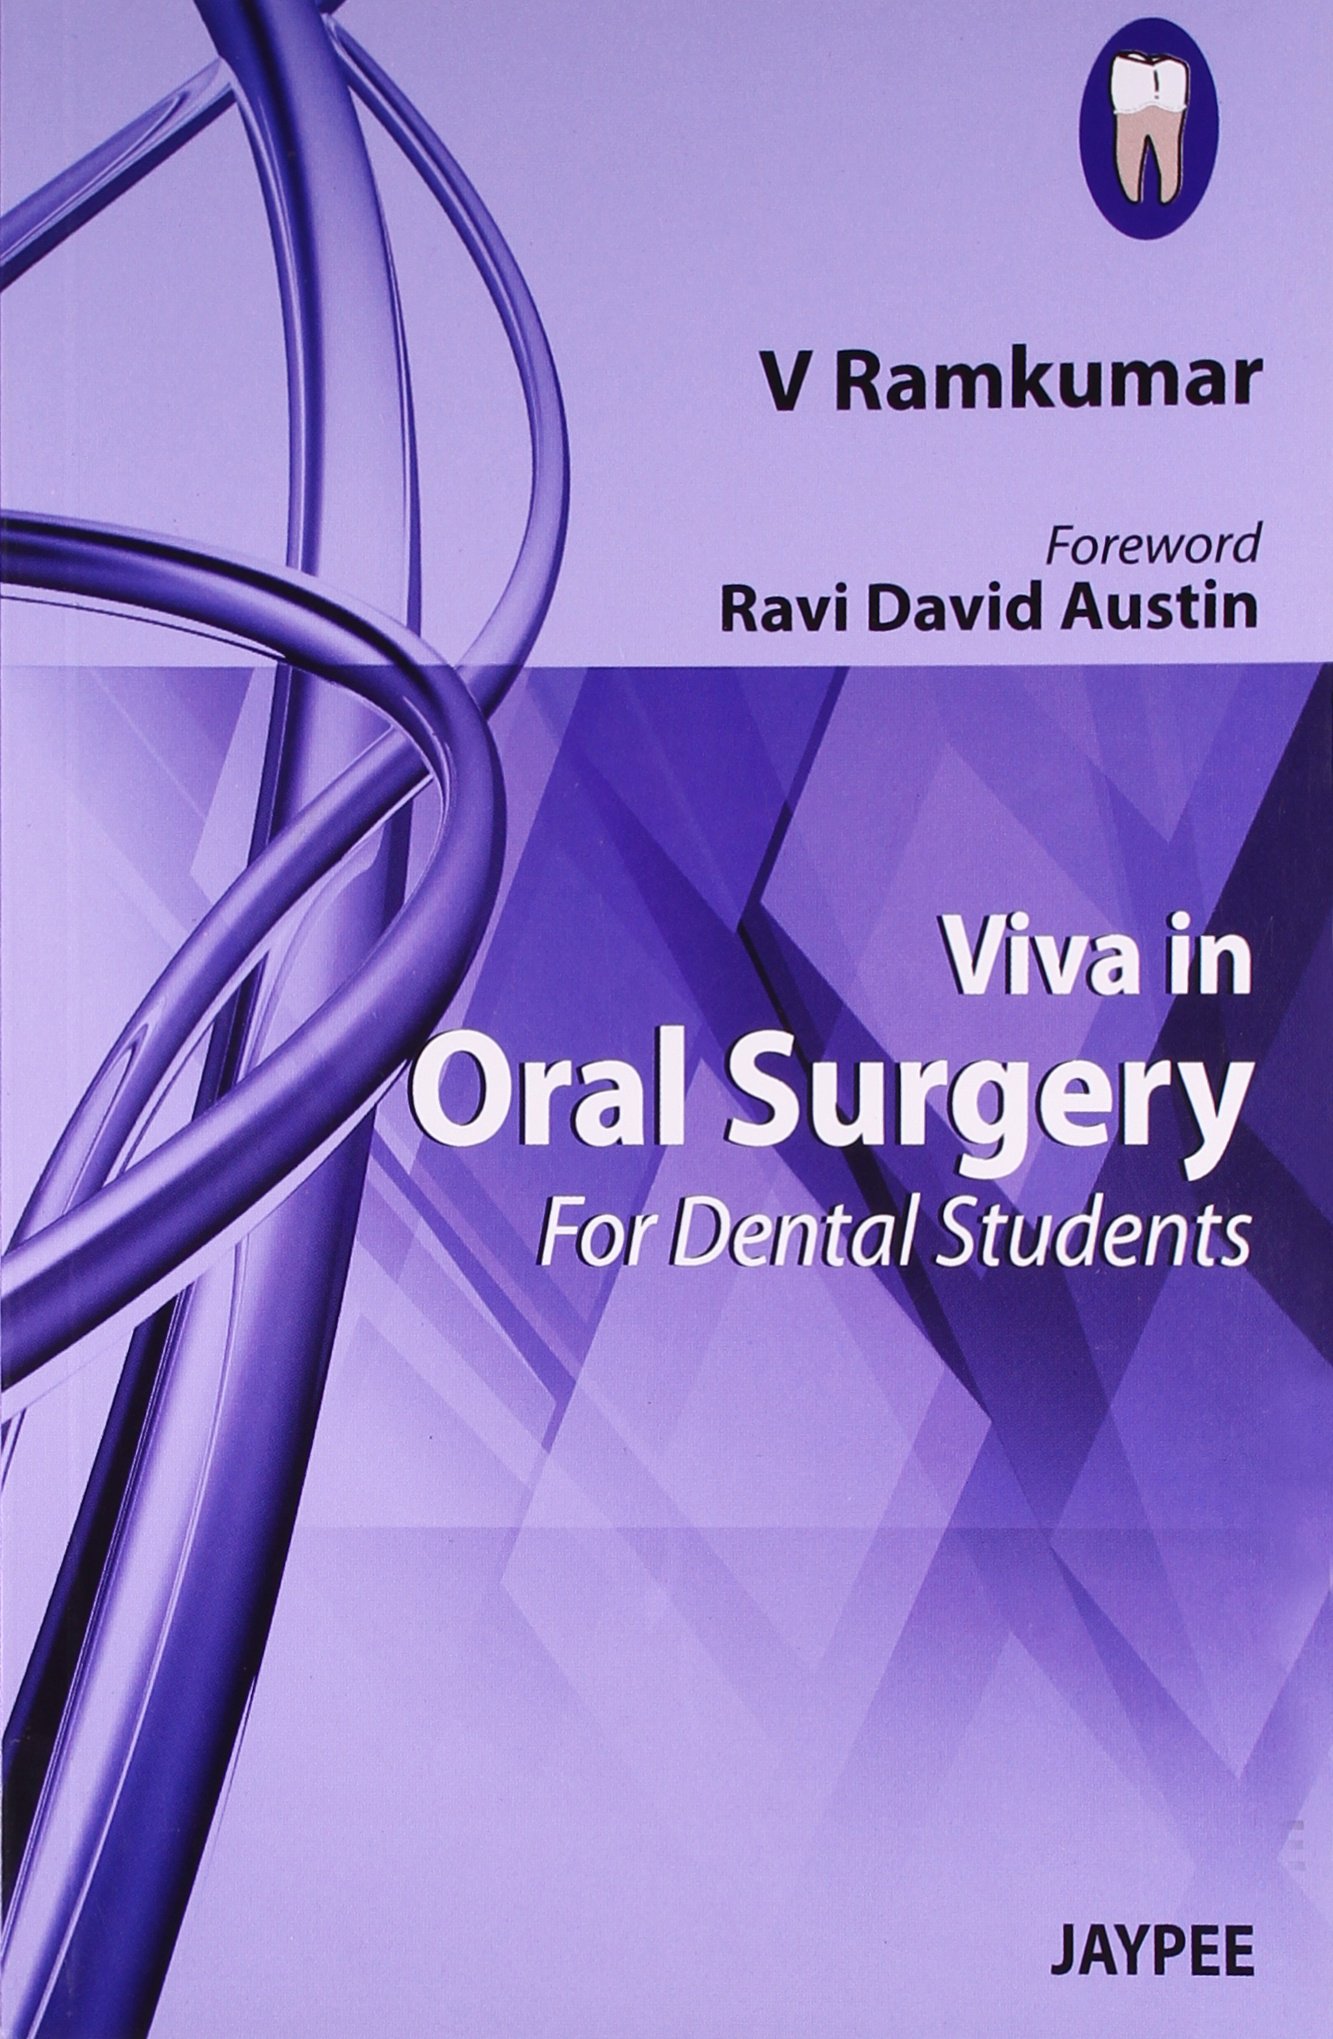 viva-in-oral-surgery-for-dental-students